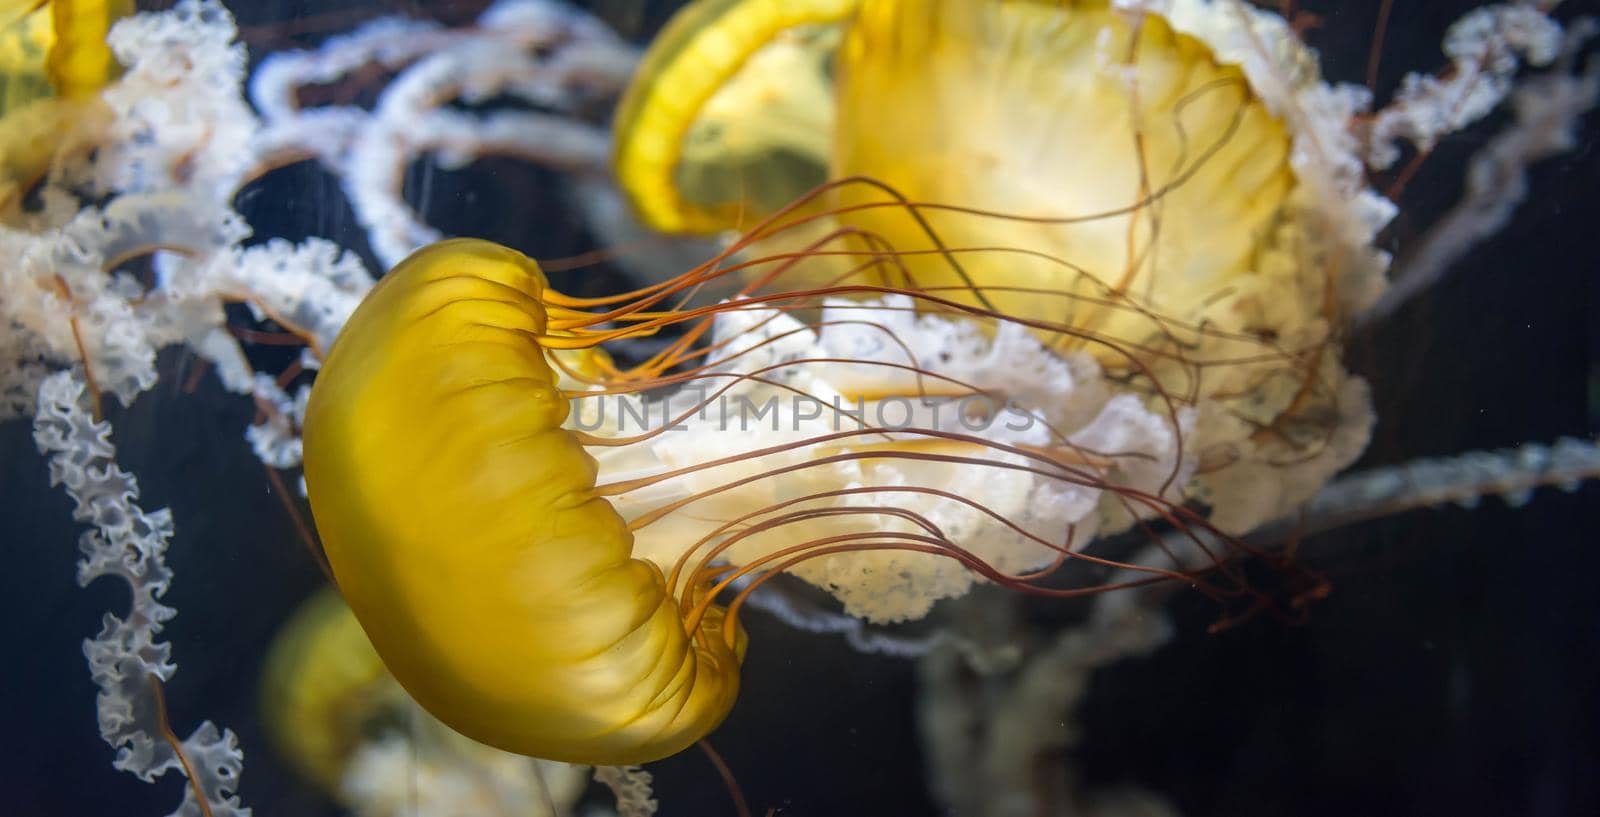 Background image of Chrysaora fuscescens macro close up shot. The Pacific sea nettle (Chrysaora fuscescens), or West Coast sea nettle, is a common free-floating scyphozoan that lives in the eastern Pacific Ocean